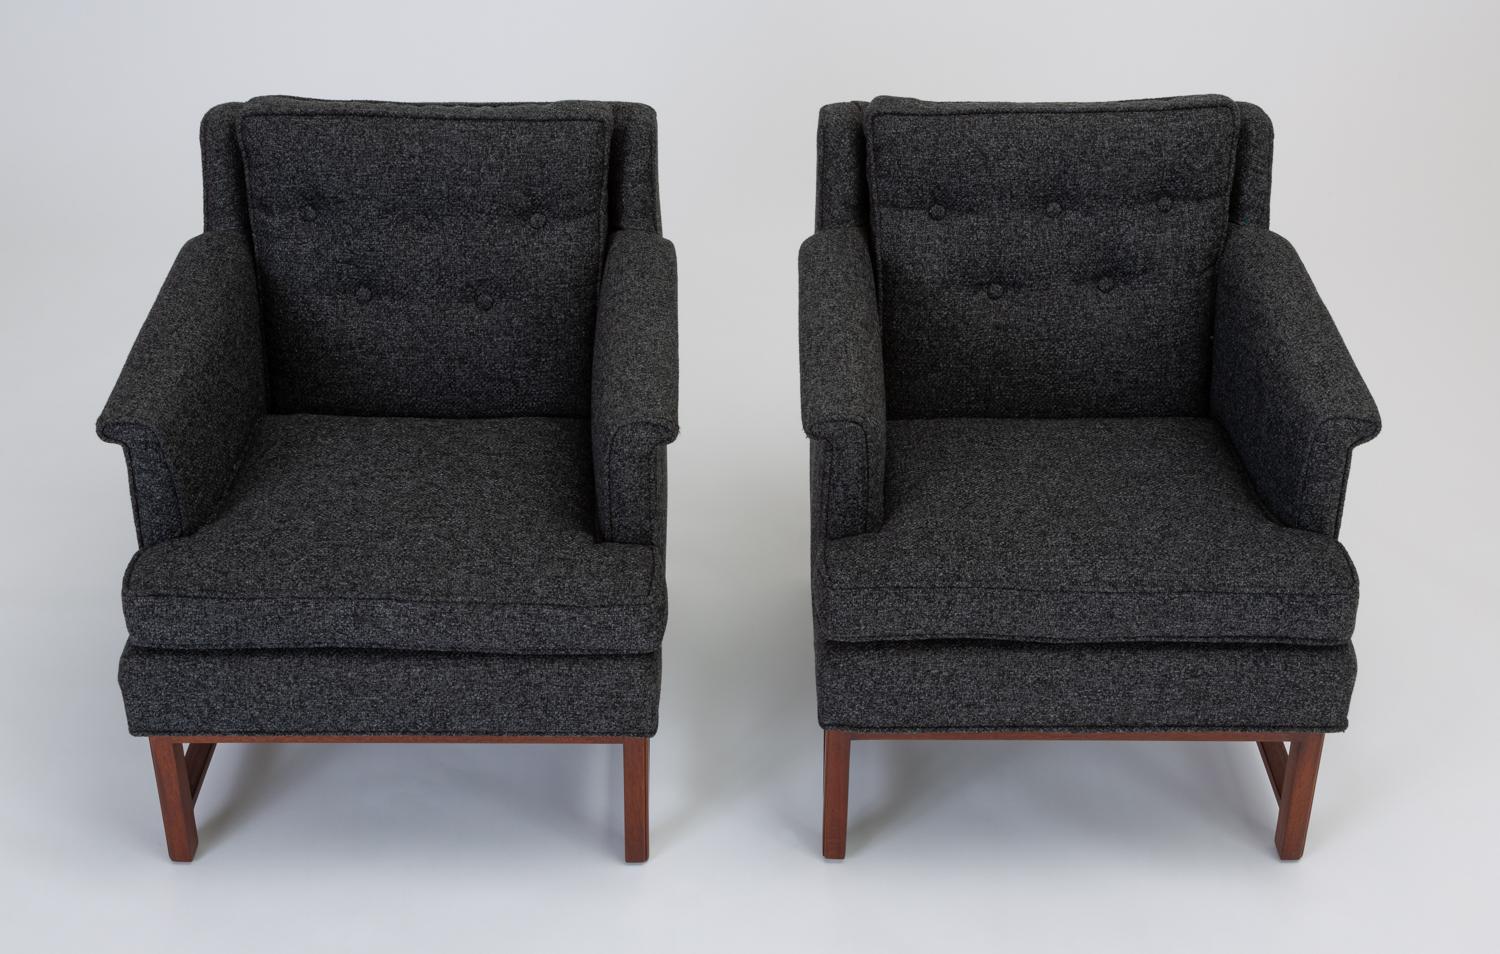 American Pair of Petite Lounge Chairs by Edward Wormley for Dunbar